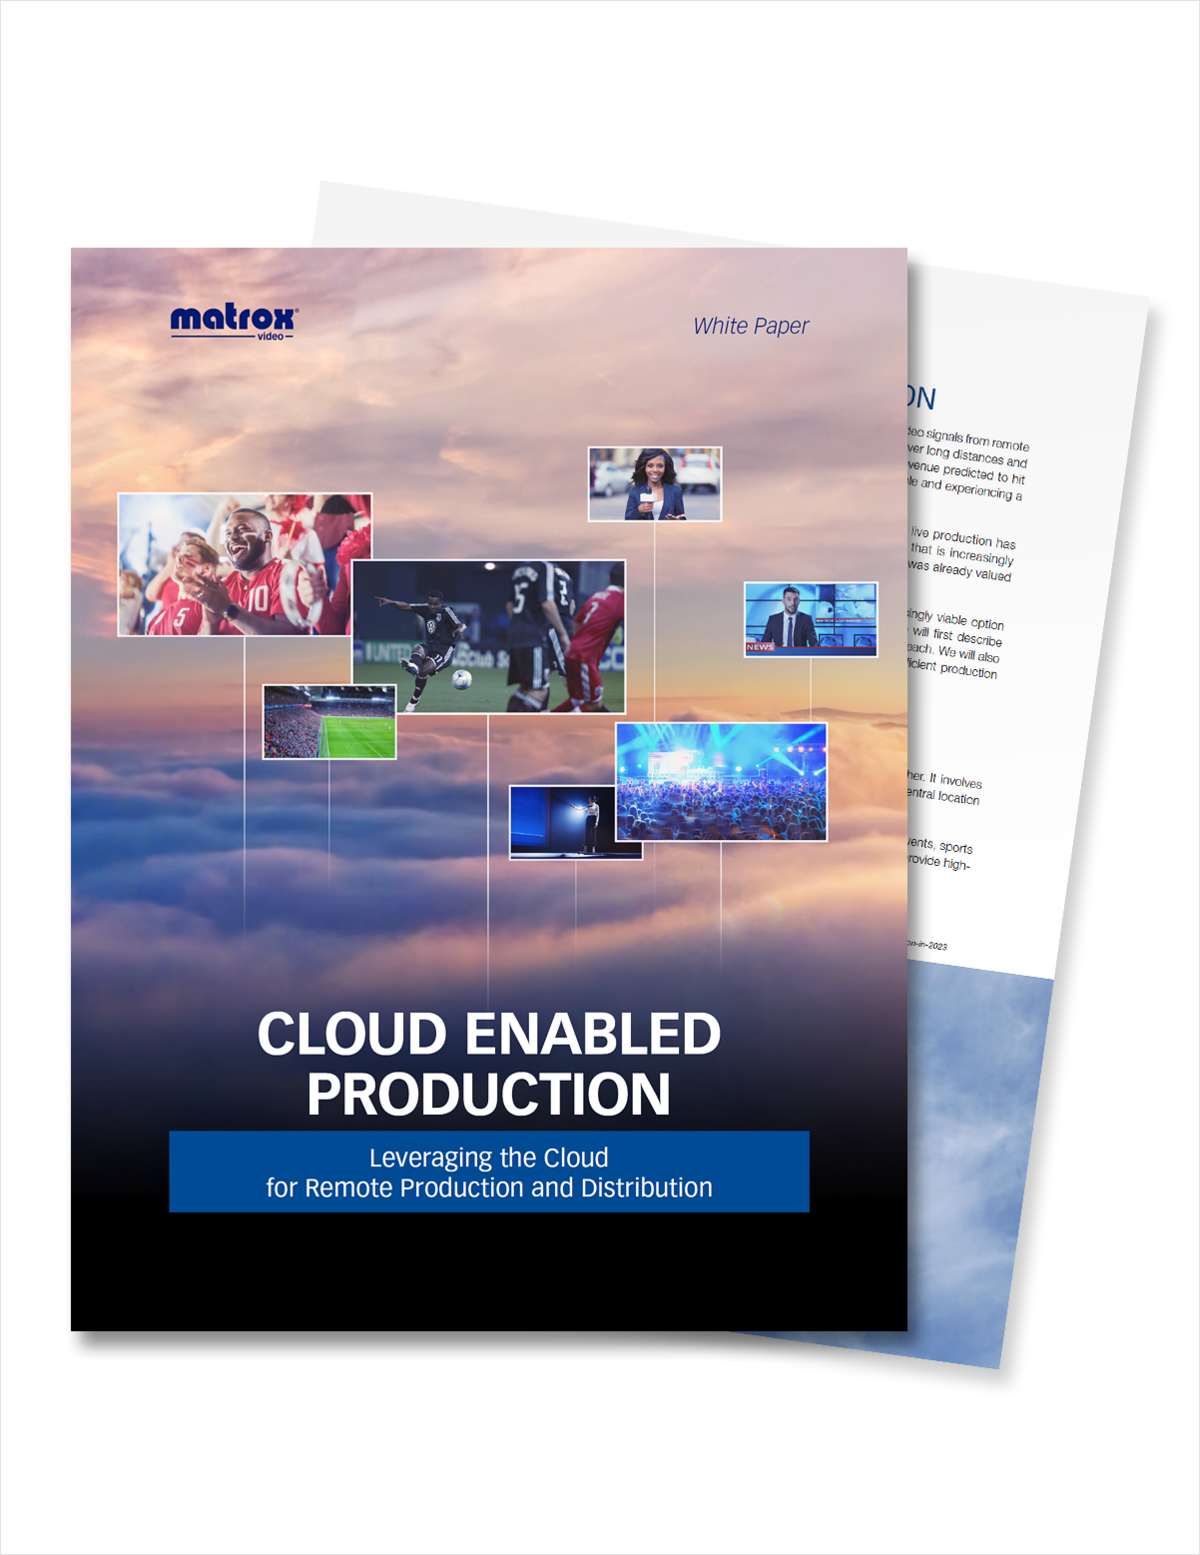 Cloud Enabled Production: Leveraging the Cloud for Remote Production and Distribution